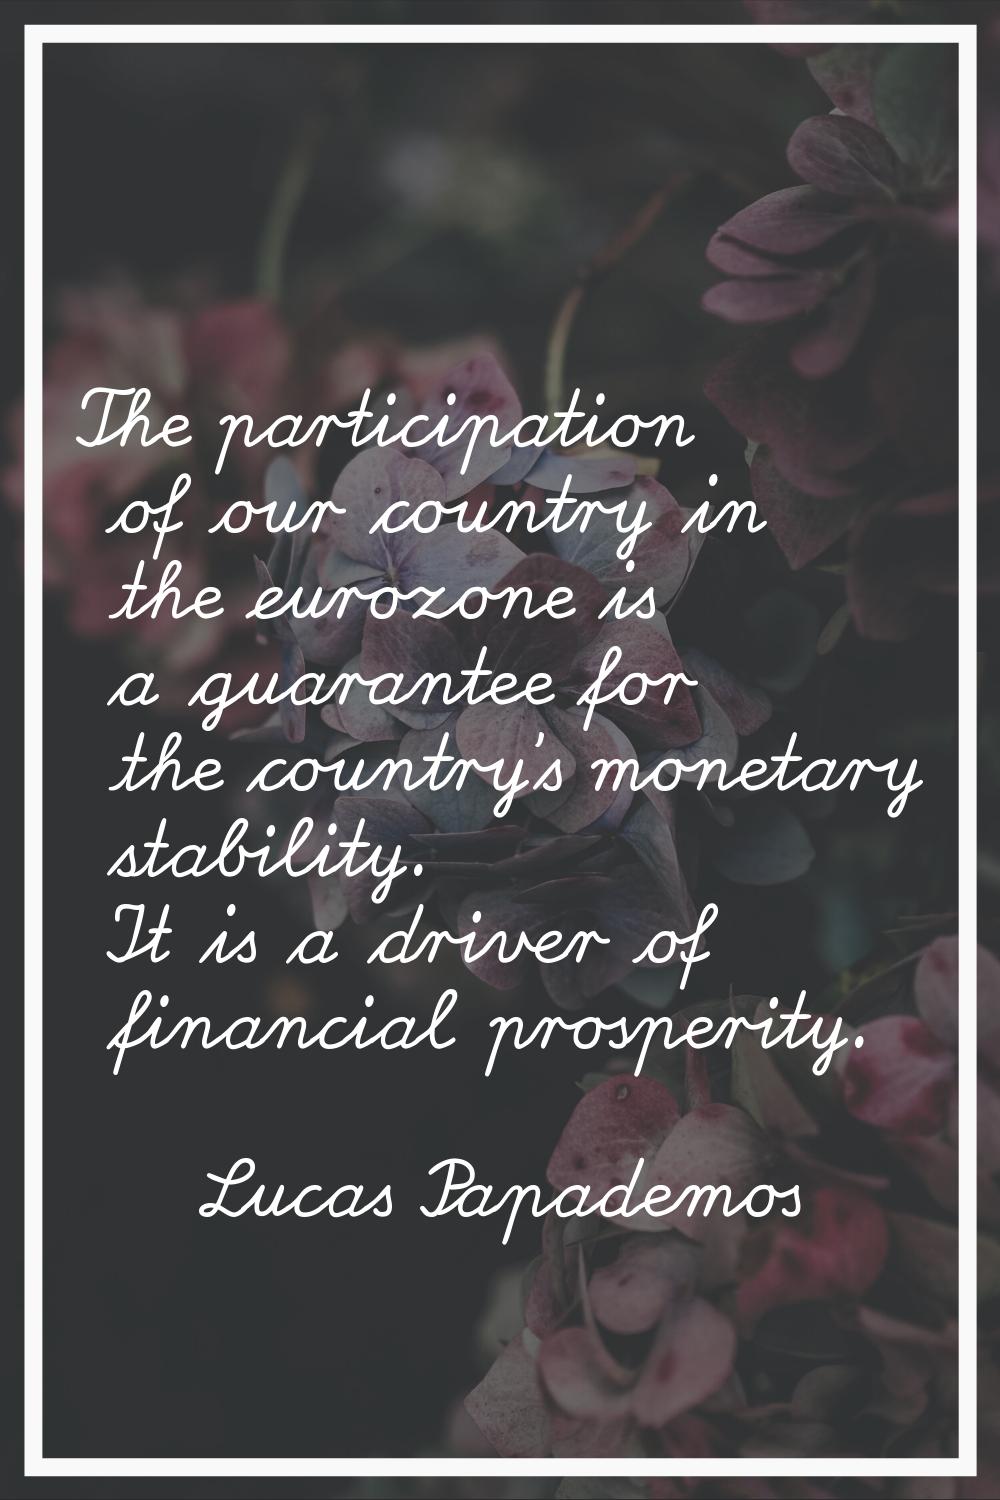 The participation of our country in the eurozone is a guarantee for the country's monetary stabilit